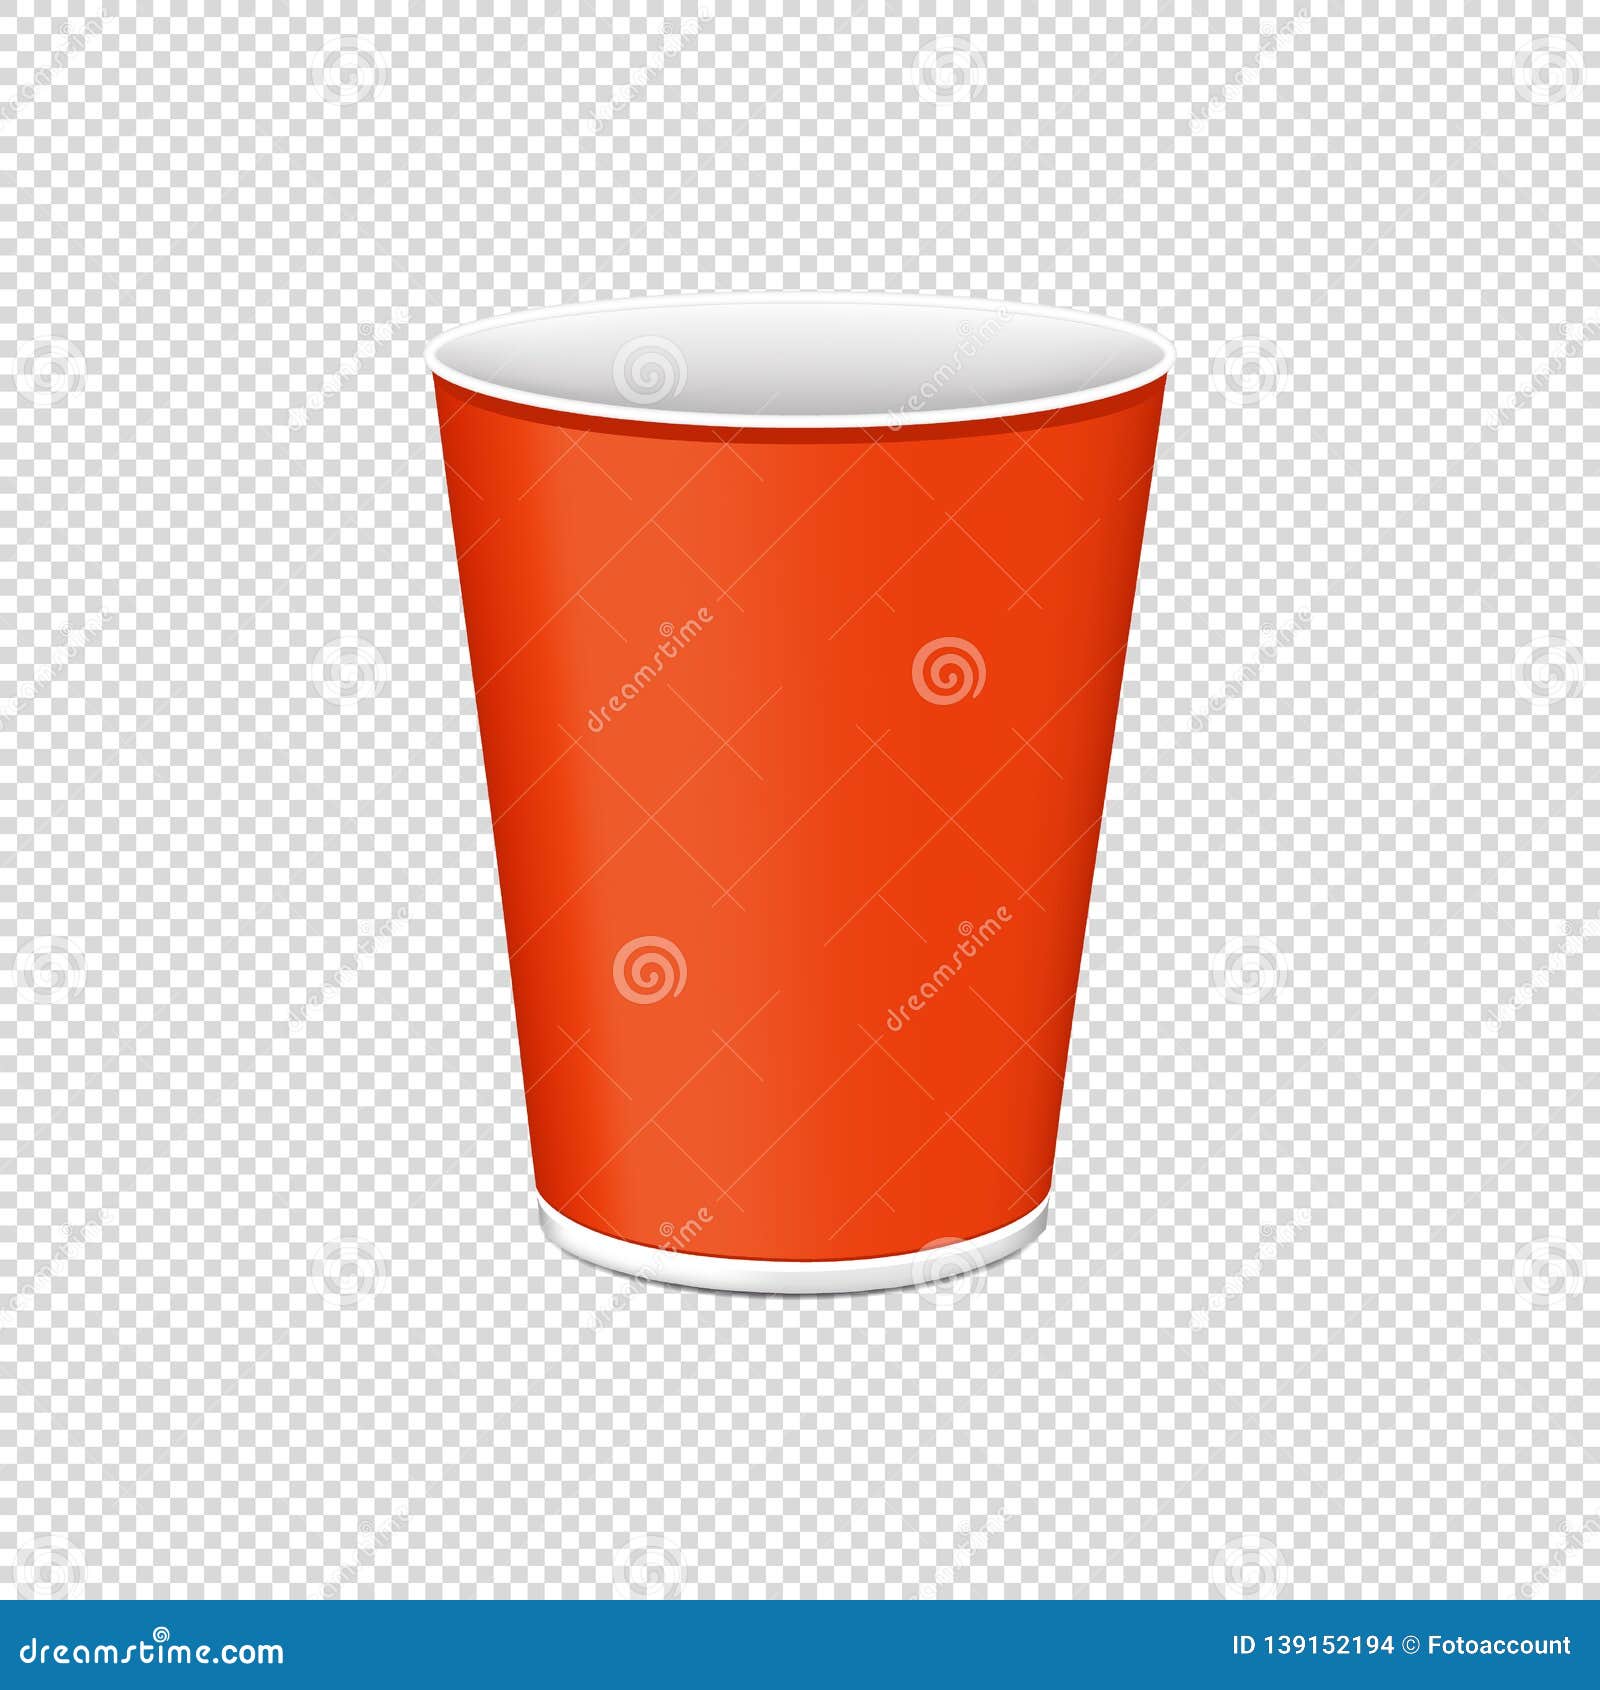 Orange Plastic Cup For Single Use - Vector Illustration - Isolated On